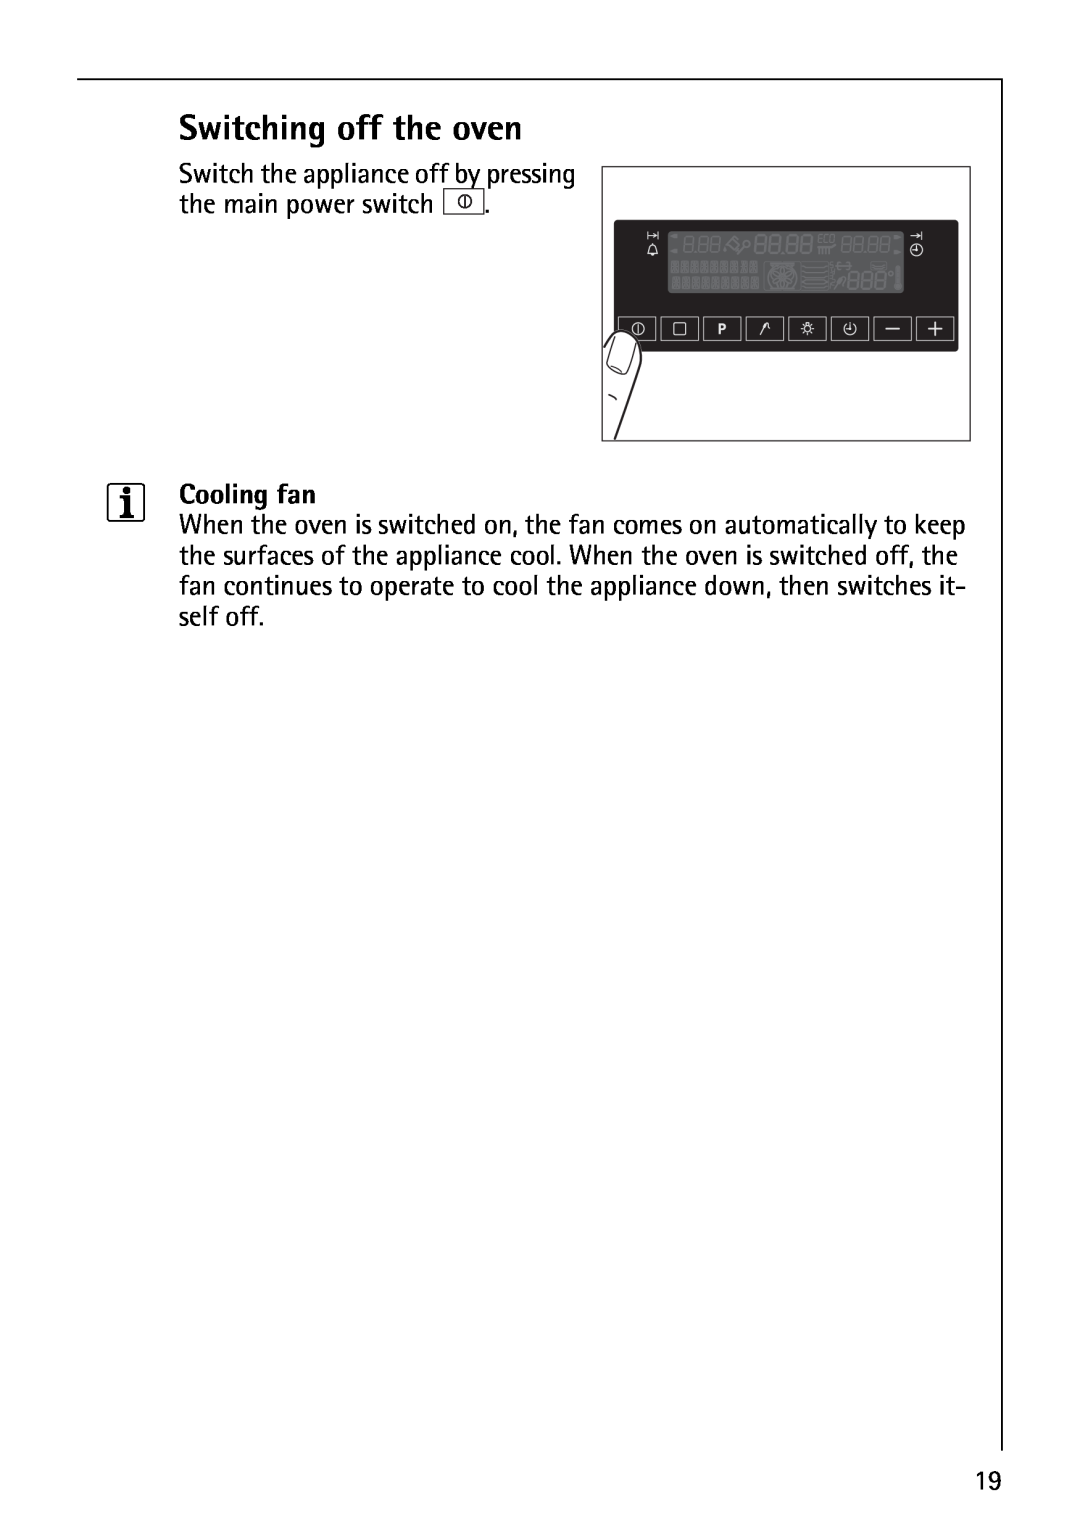 AEG B8920-1 manual Switching off the oven, Cooling fan 